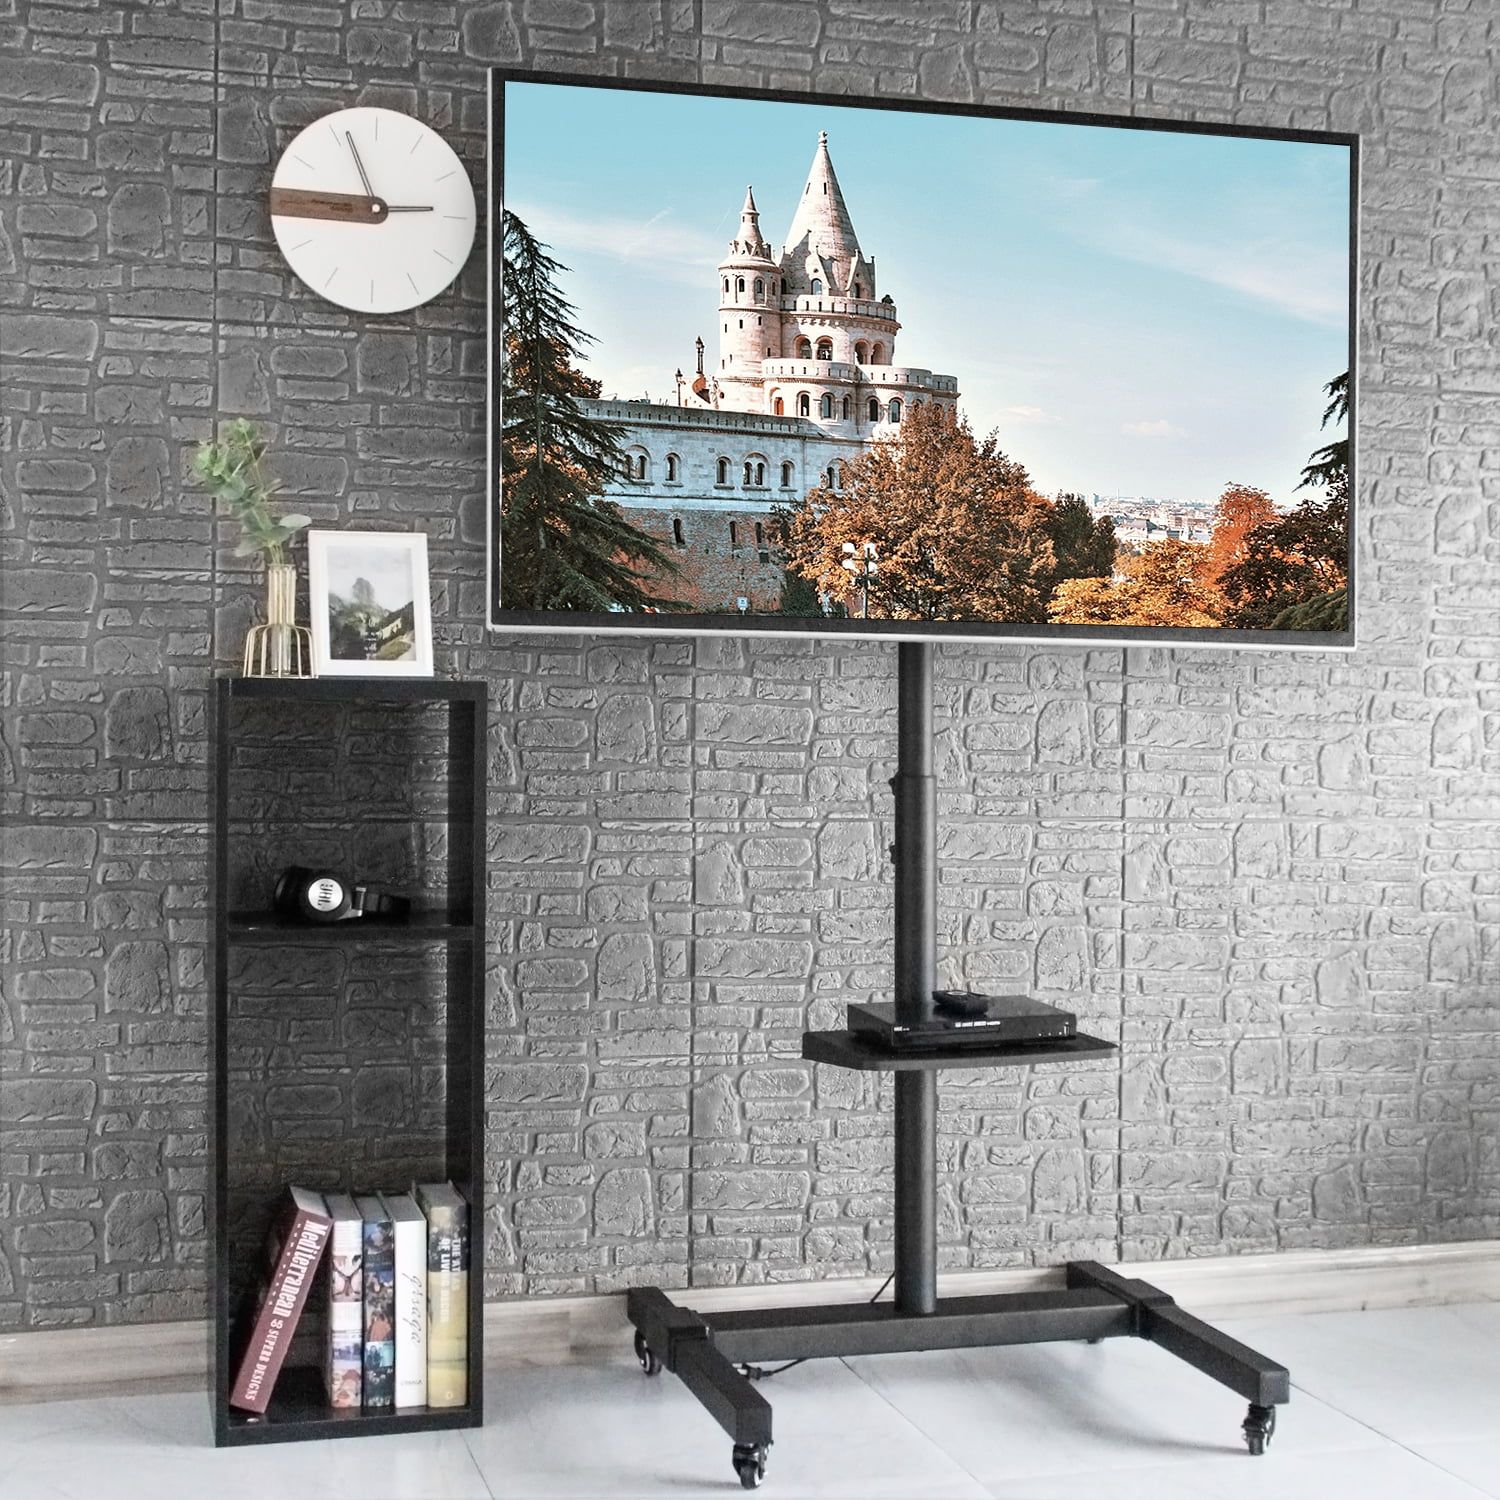 Modern 65 To 70 Inch Tv Stand Rolling Tv Cart Home, Black – Walmart With Modern Rolling Tv Stands (View 4 of 20)